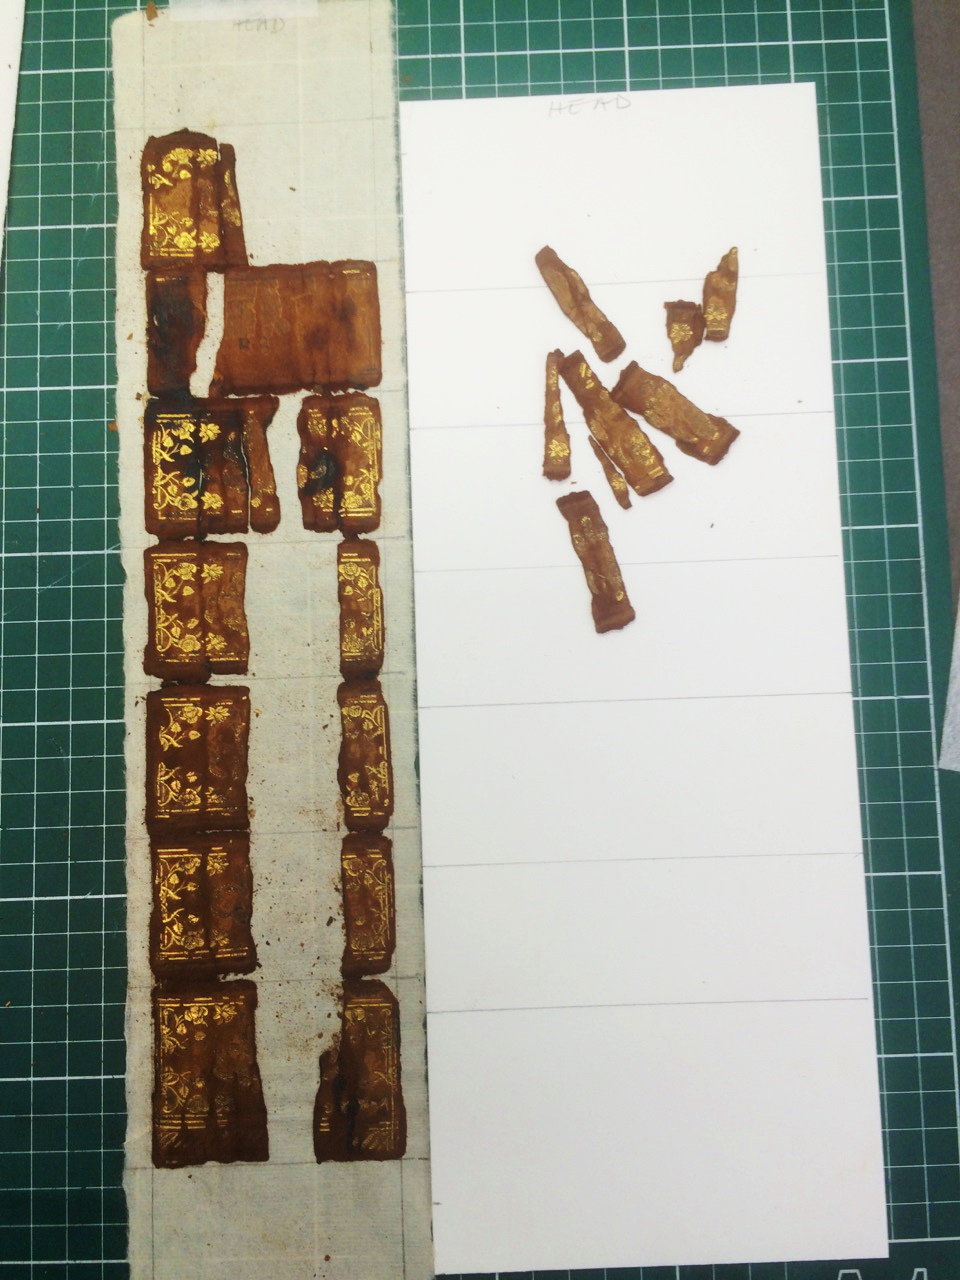 Spine of book in pieces